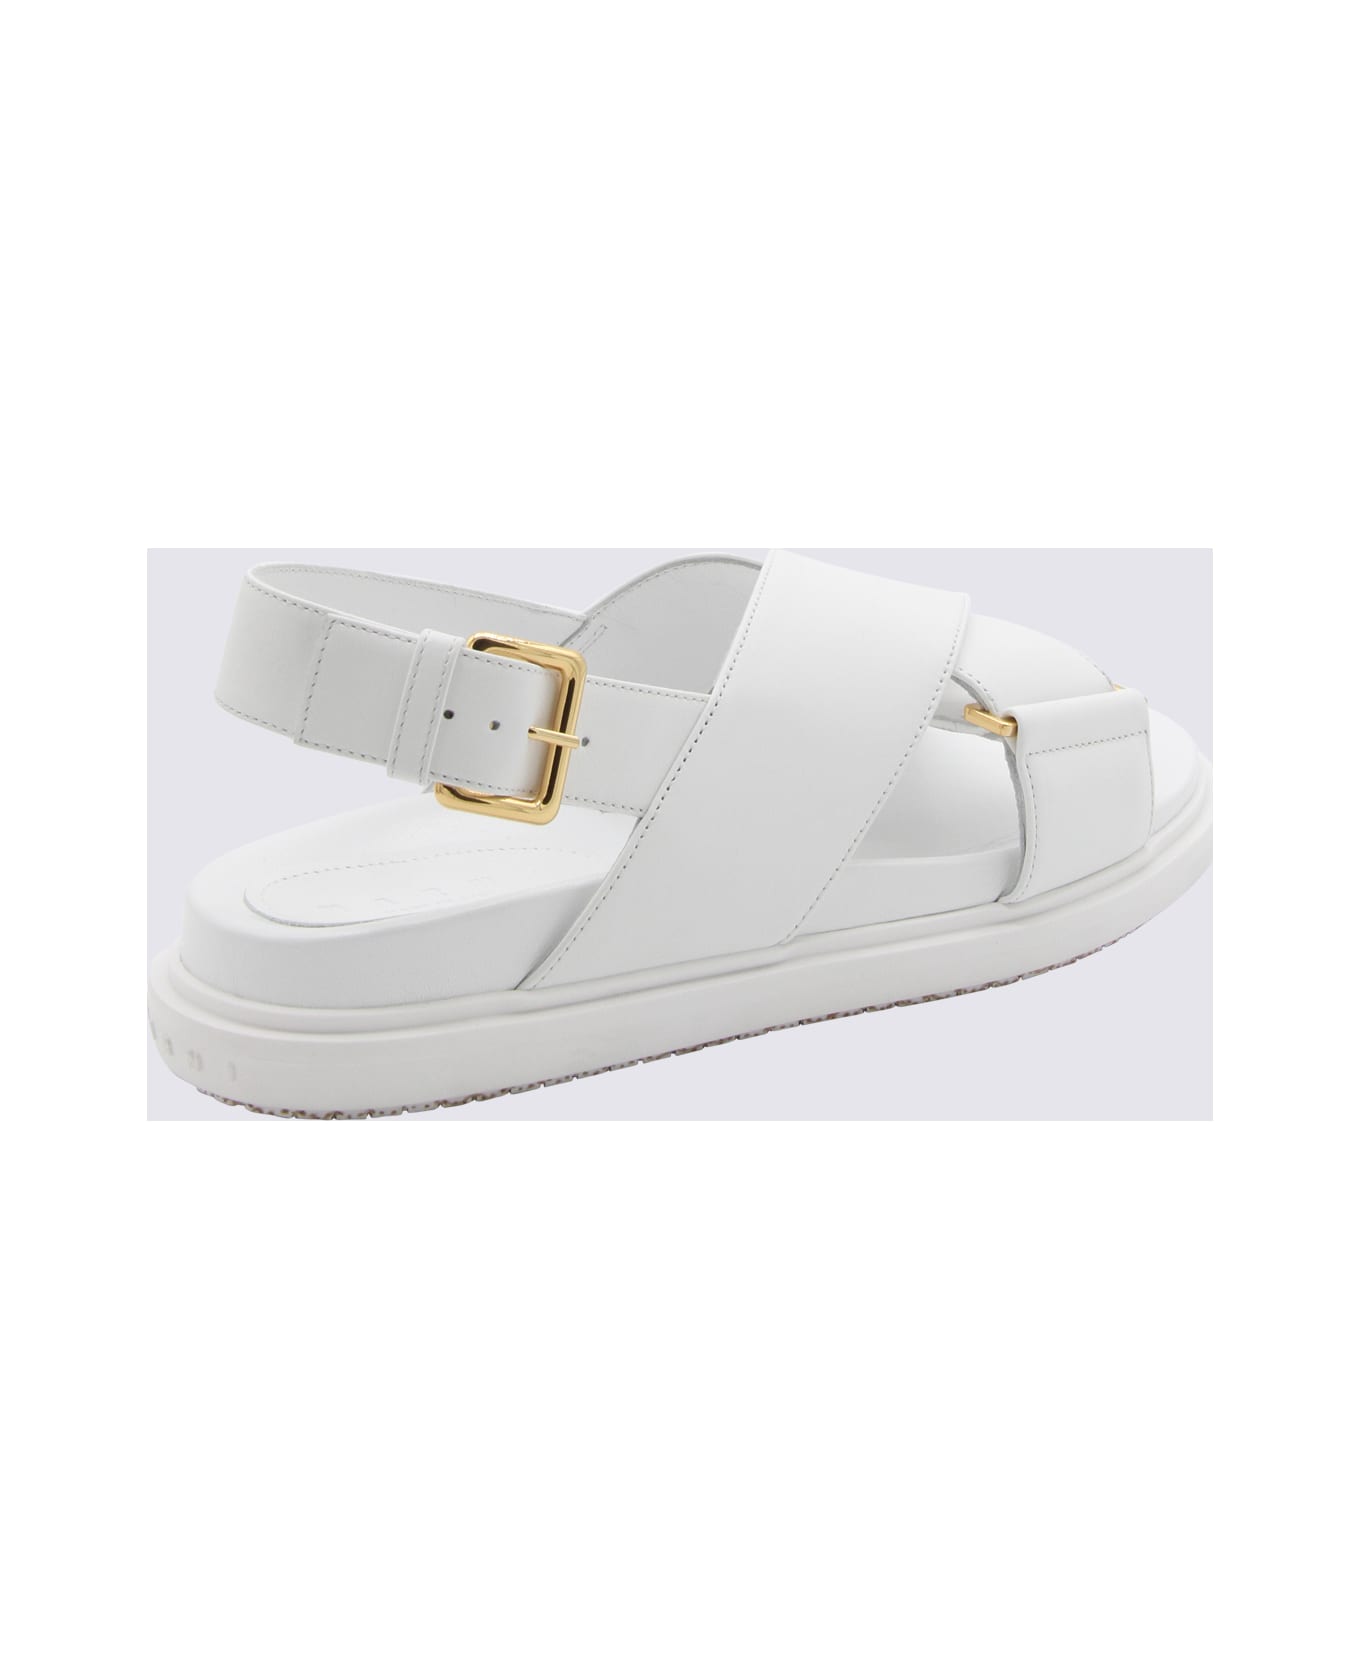 Marni White Leather Fussbet Sandals - LILY WHITE サンダル